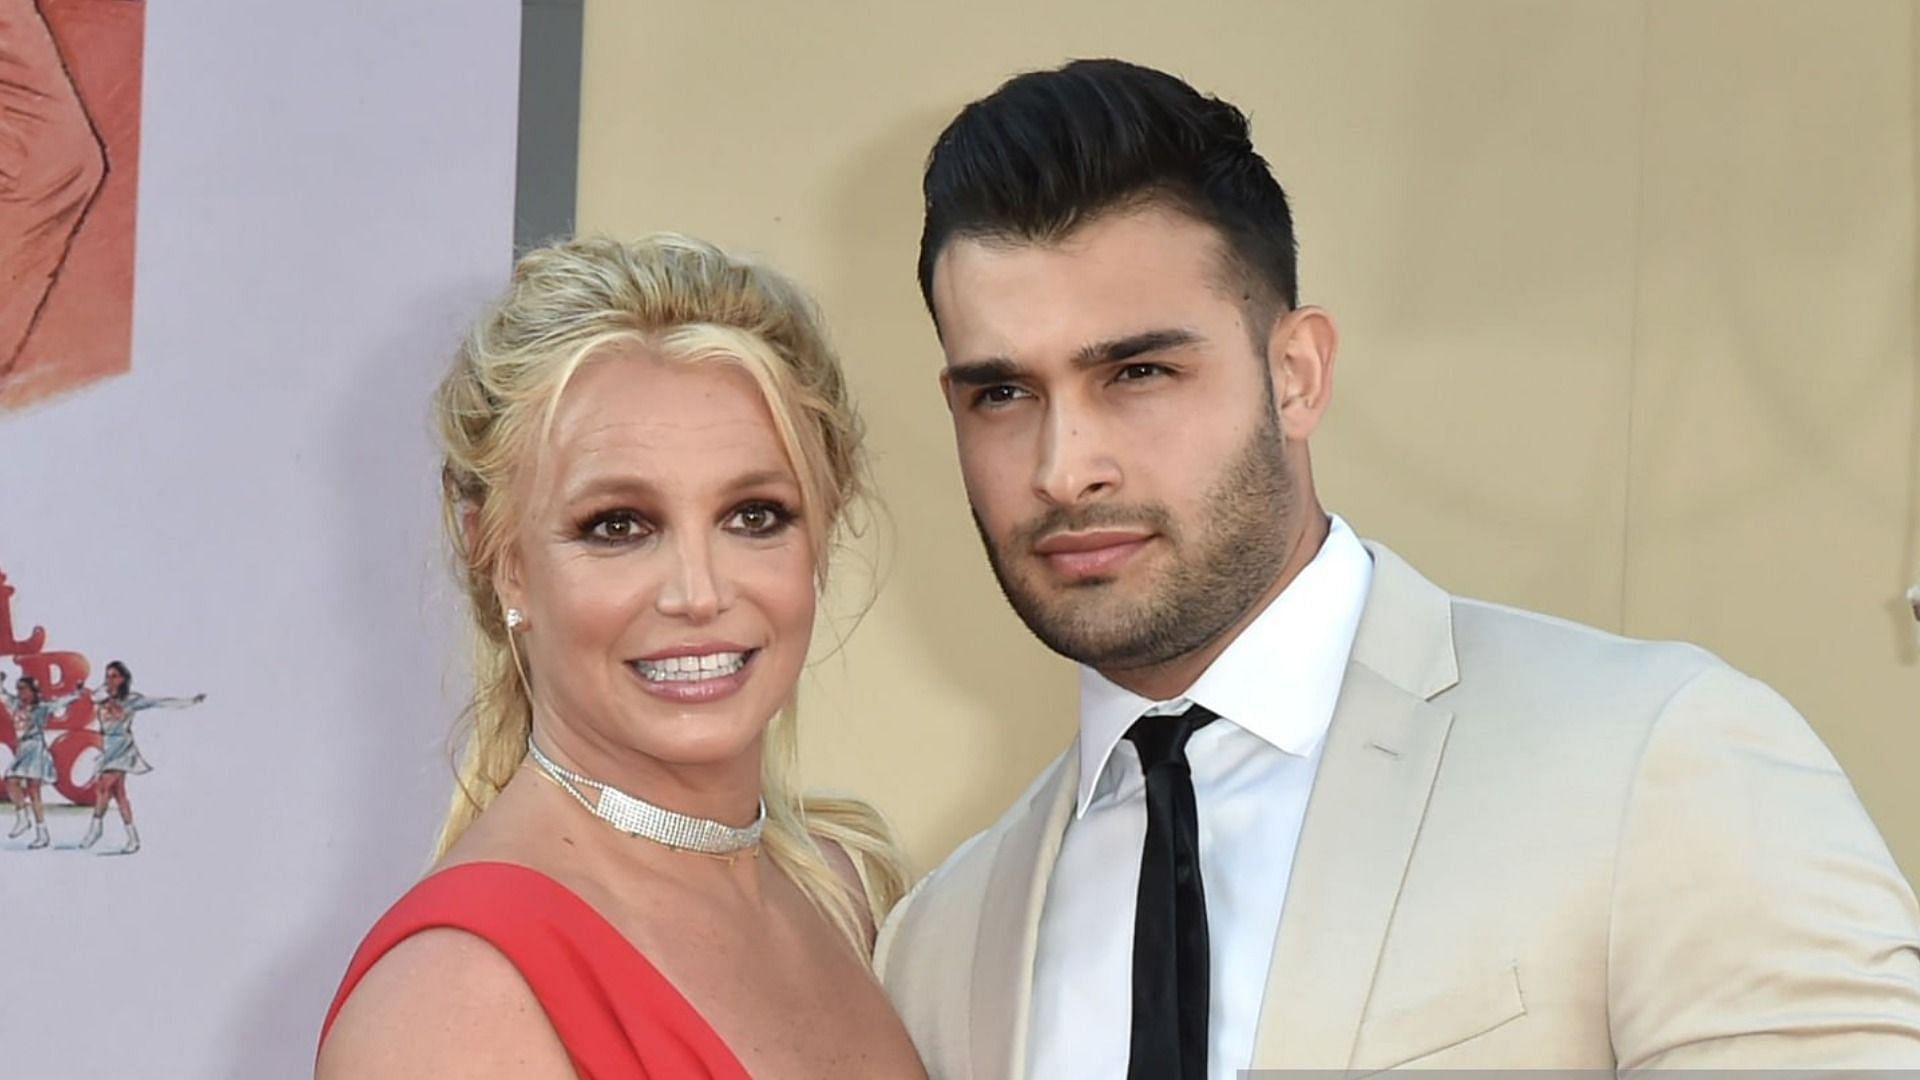 Sam Asghar and Britney Spears: An Iranian-born actor, model, and personal trainer, The husband of a famous American singer. 1920x1080 Full HD Background.